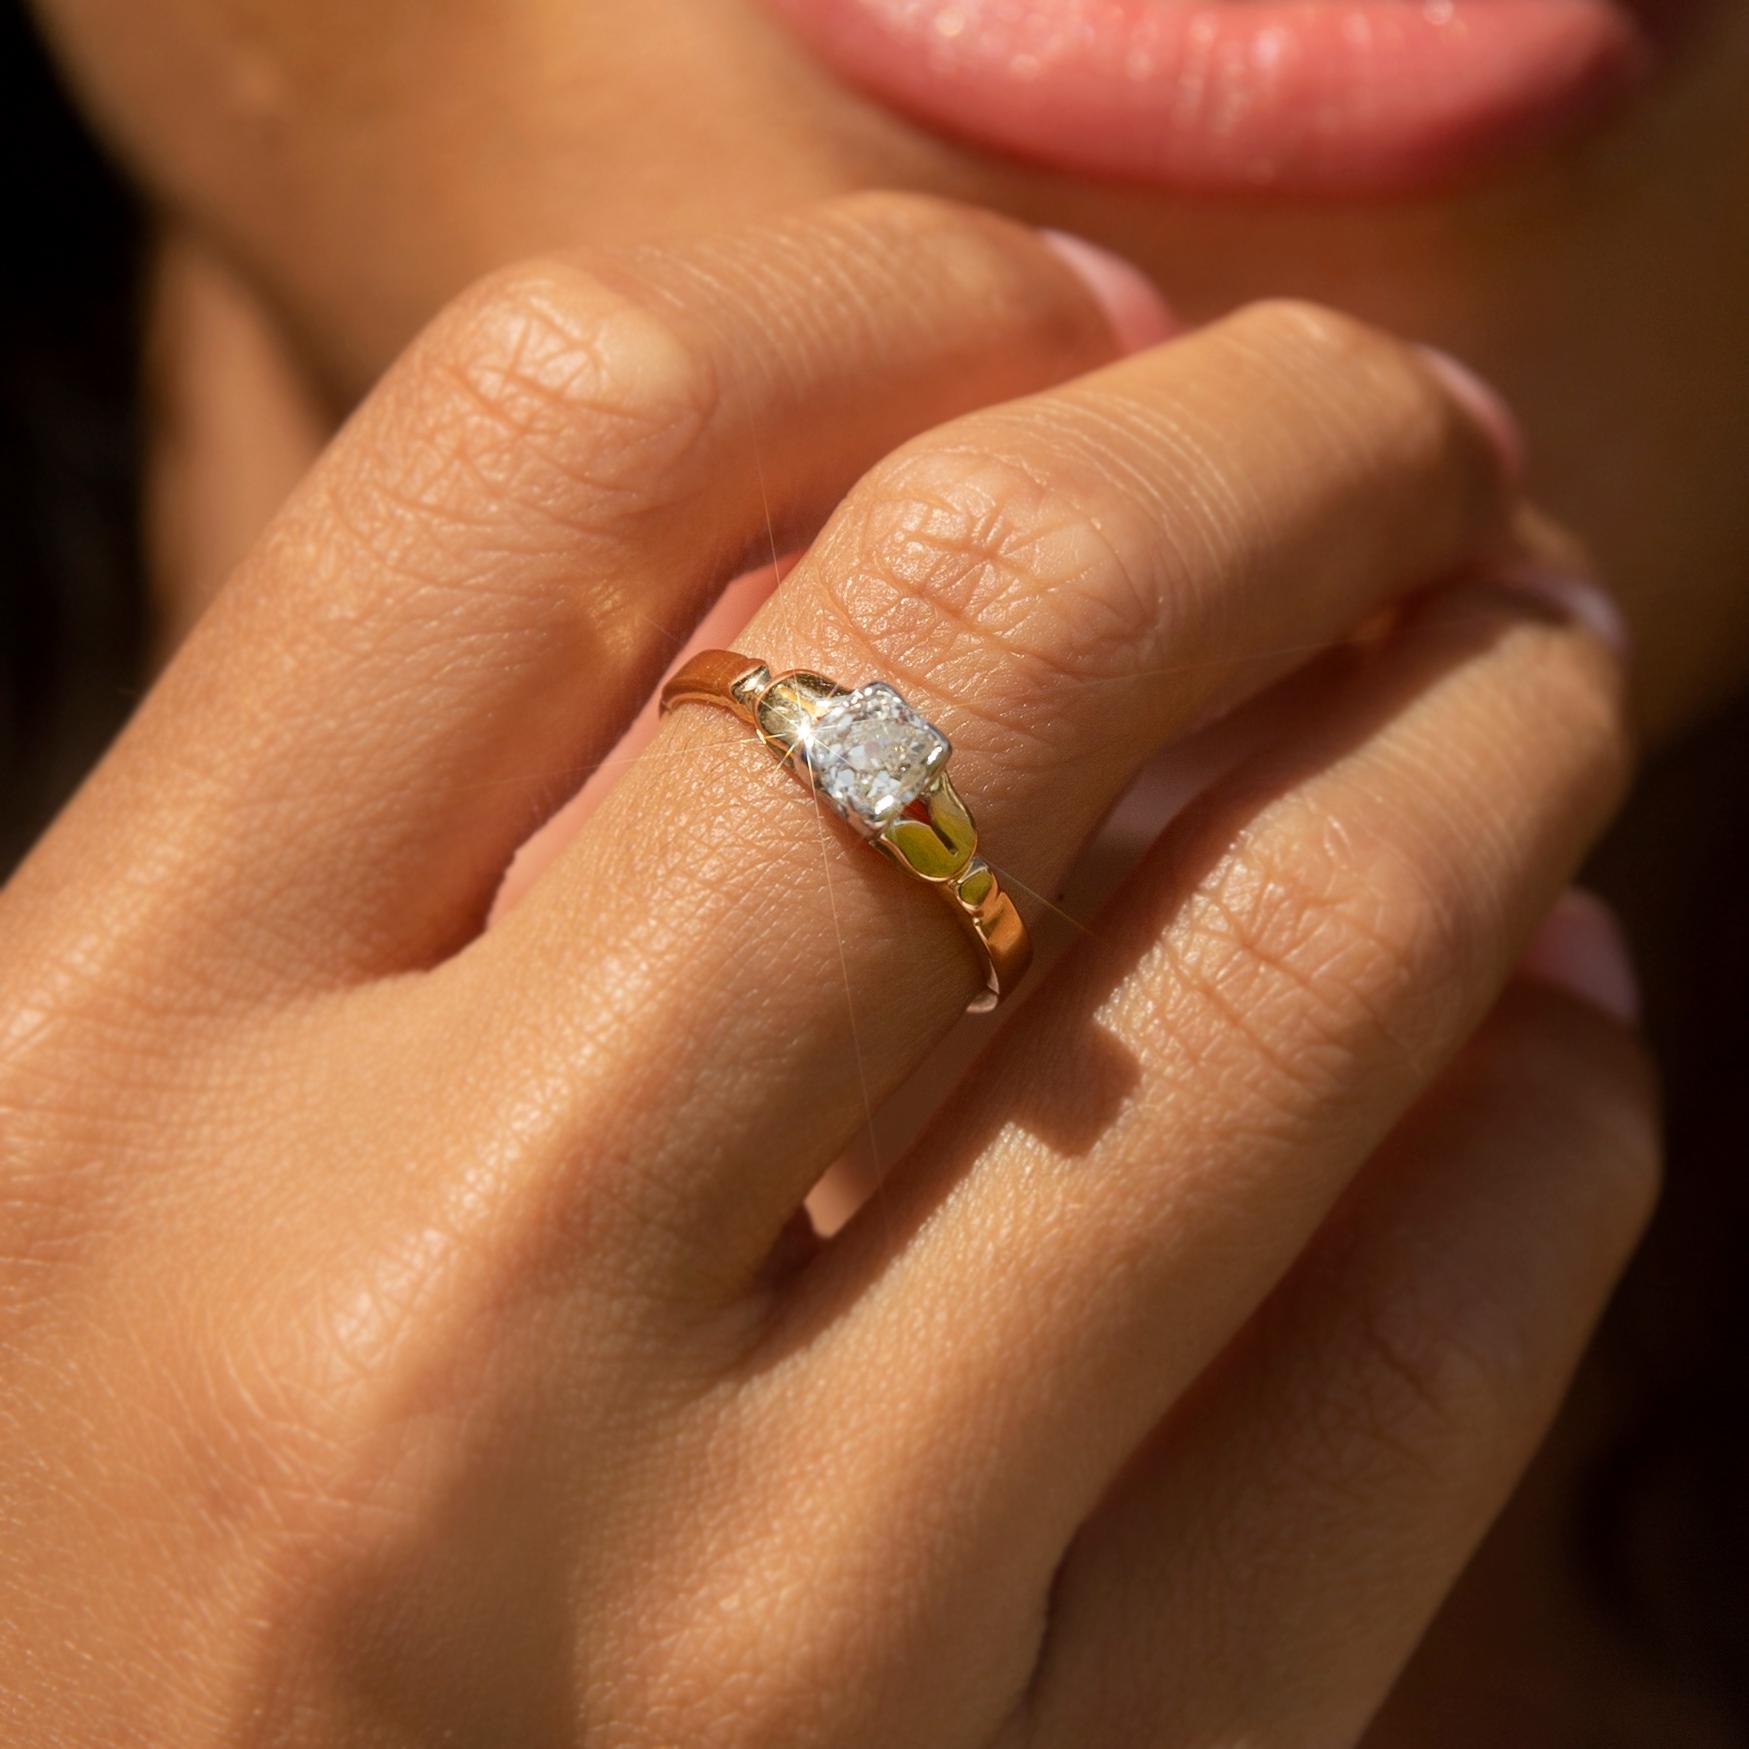 Crafted in 18 carat gold, this adorable vintage ring, circa 1930s, features a delightful Old Mine Cut diamond in an elegant white gold partial rubover setting on a gleaming yellow gold band. She has been named The Cindy Ring. Her simple yet elegant